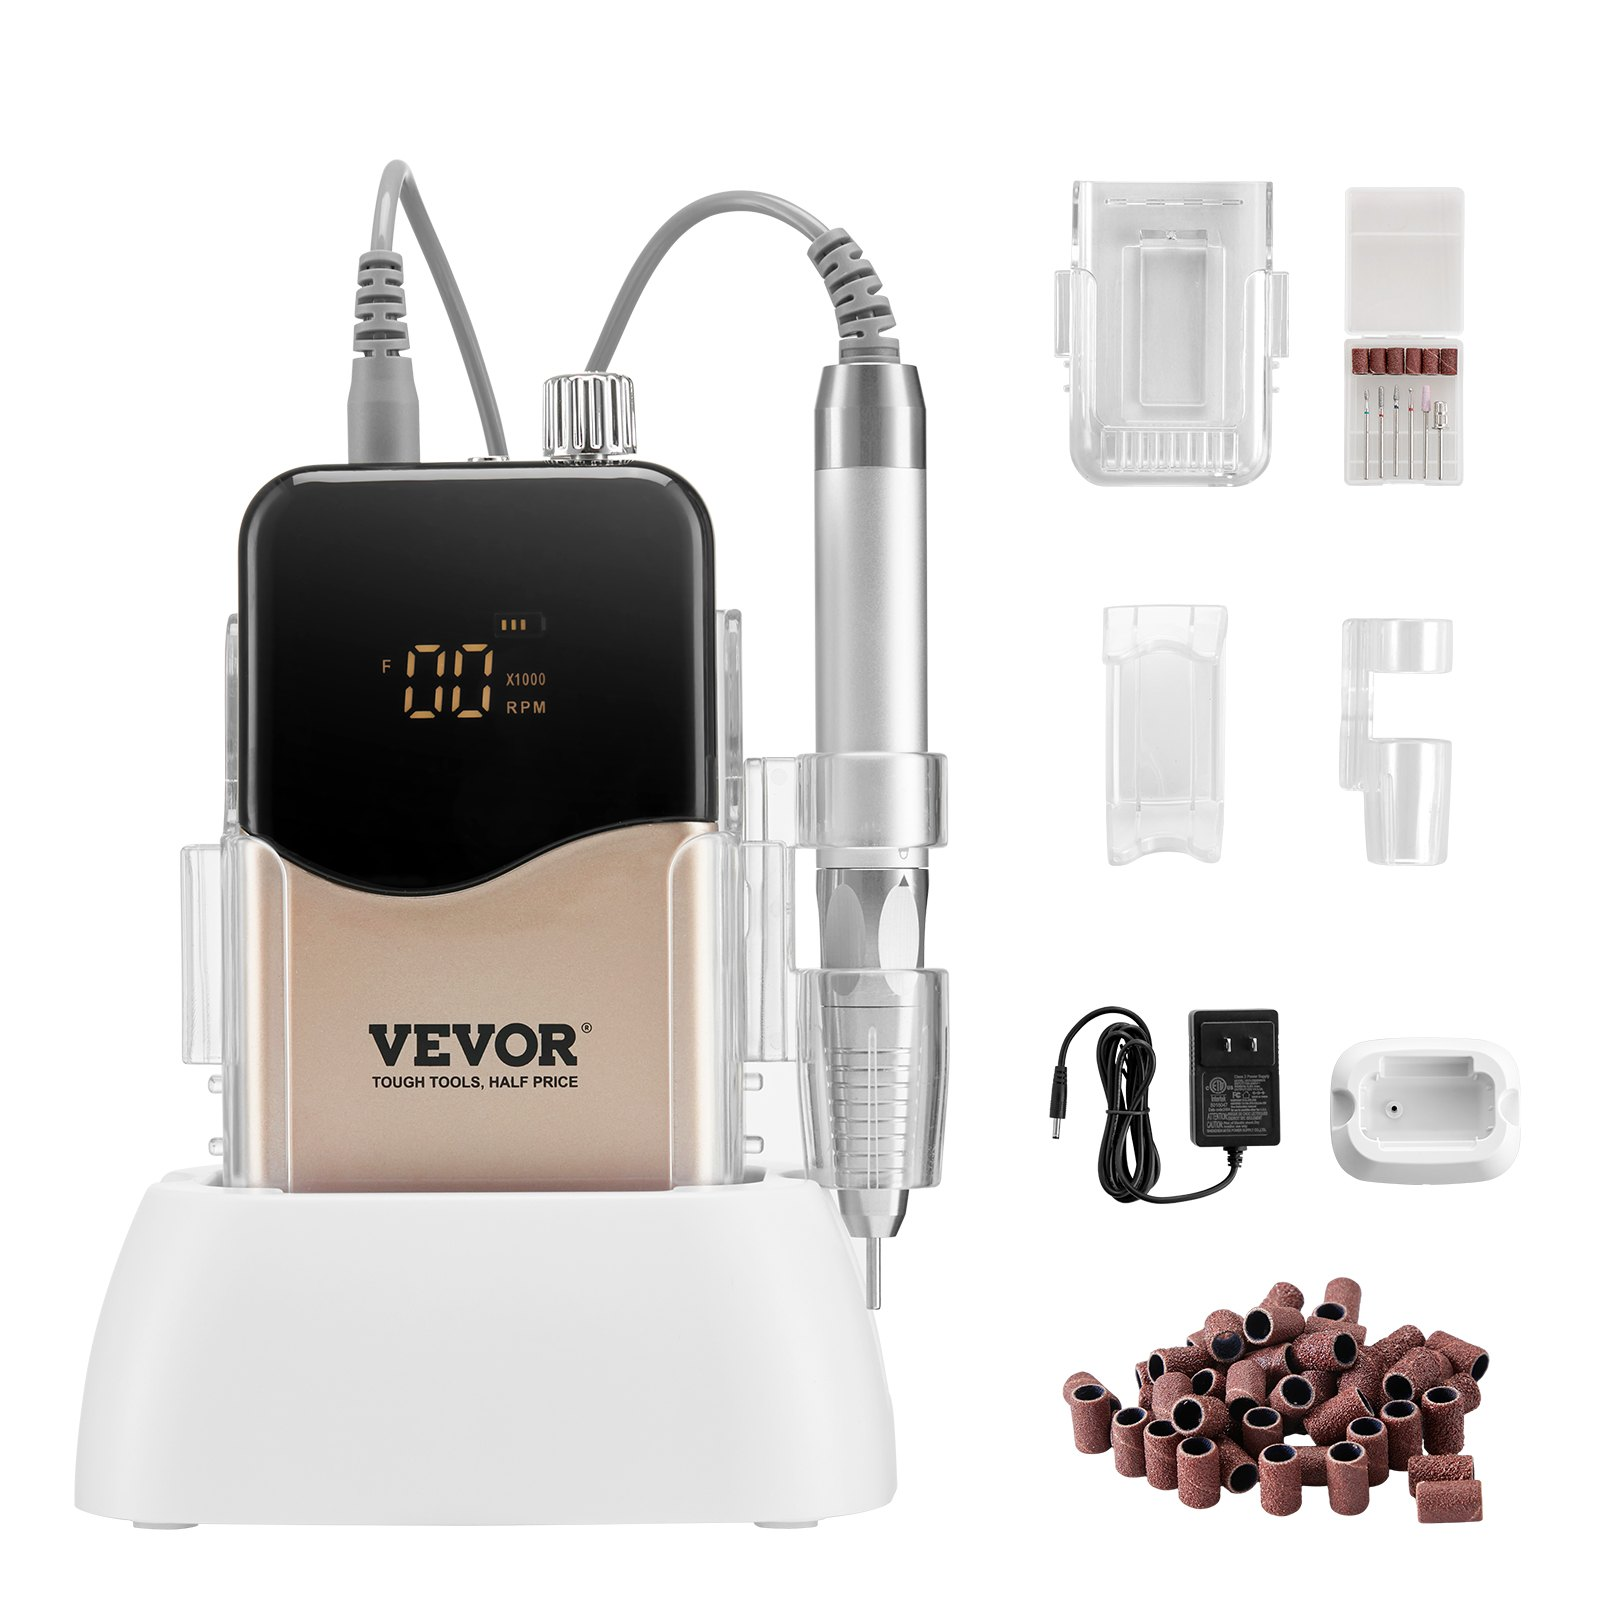 VEVOR Electric Cordless Nail Drill - with 35000RRM Brushless Motor and Charging Base, Rechargeable Nail E File Machine with 6 Bit & 50PCS Sanding Band for Acrylic Gel Nail, Manicure Pedicure Polishing, Goodies N Stuff